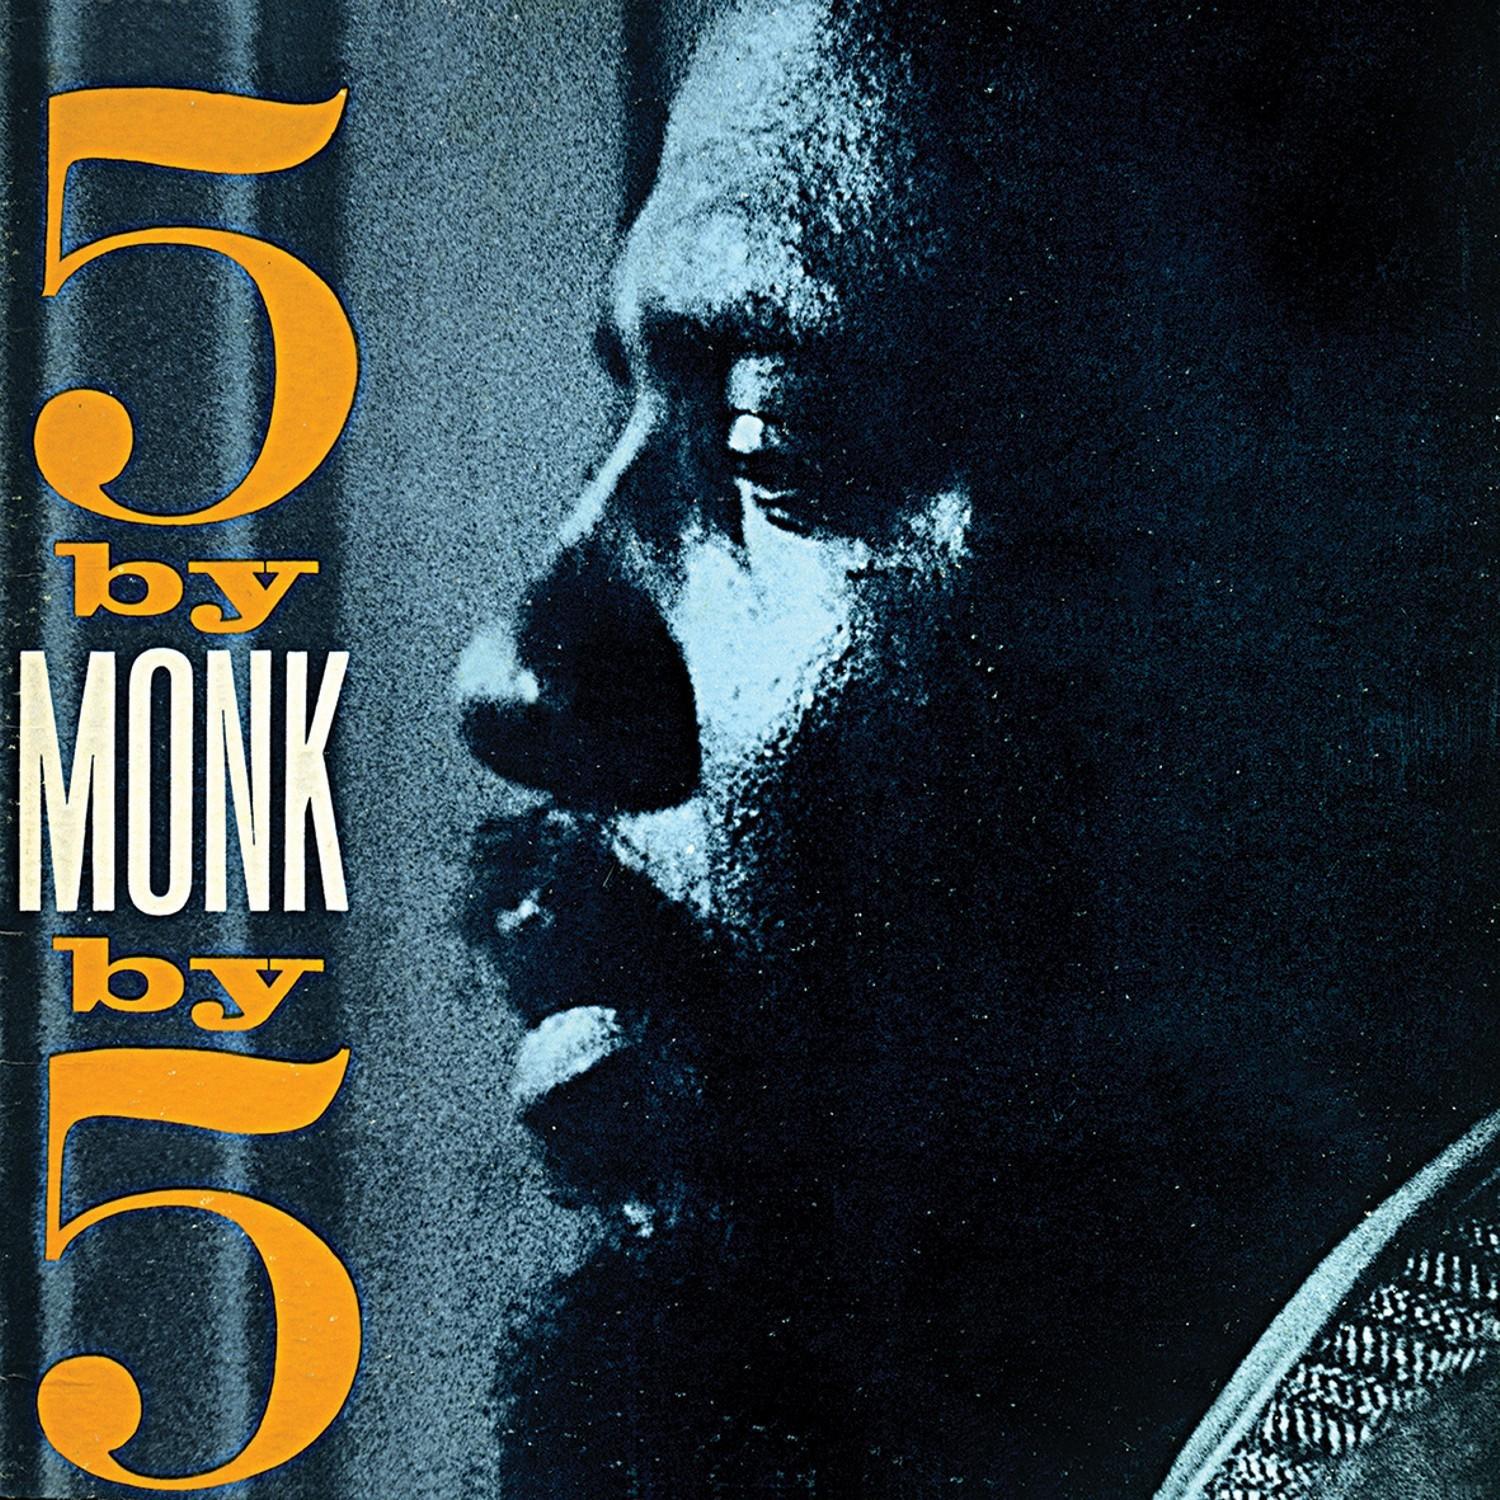 5 by Monk by 5 (Remastered)专辑